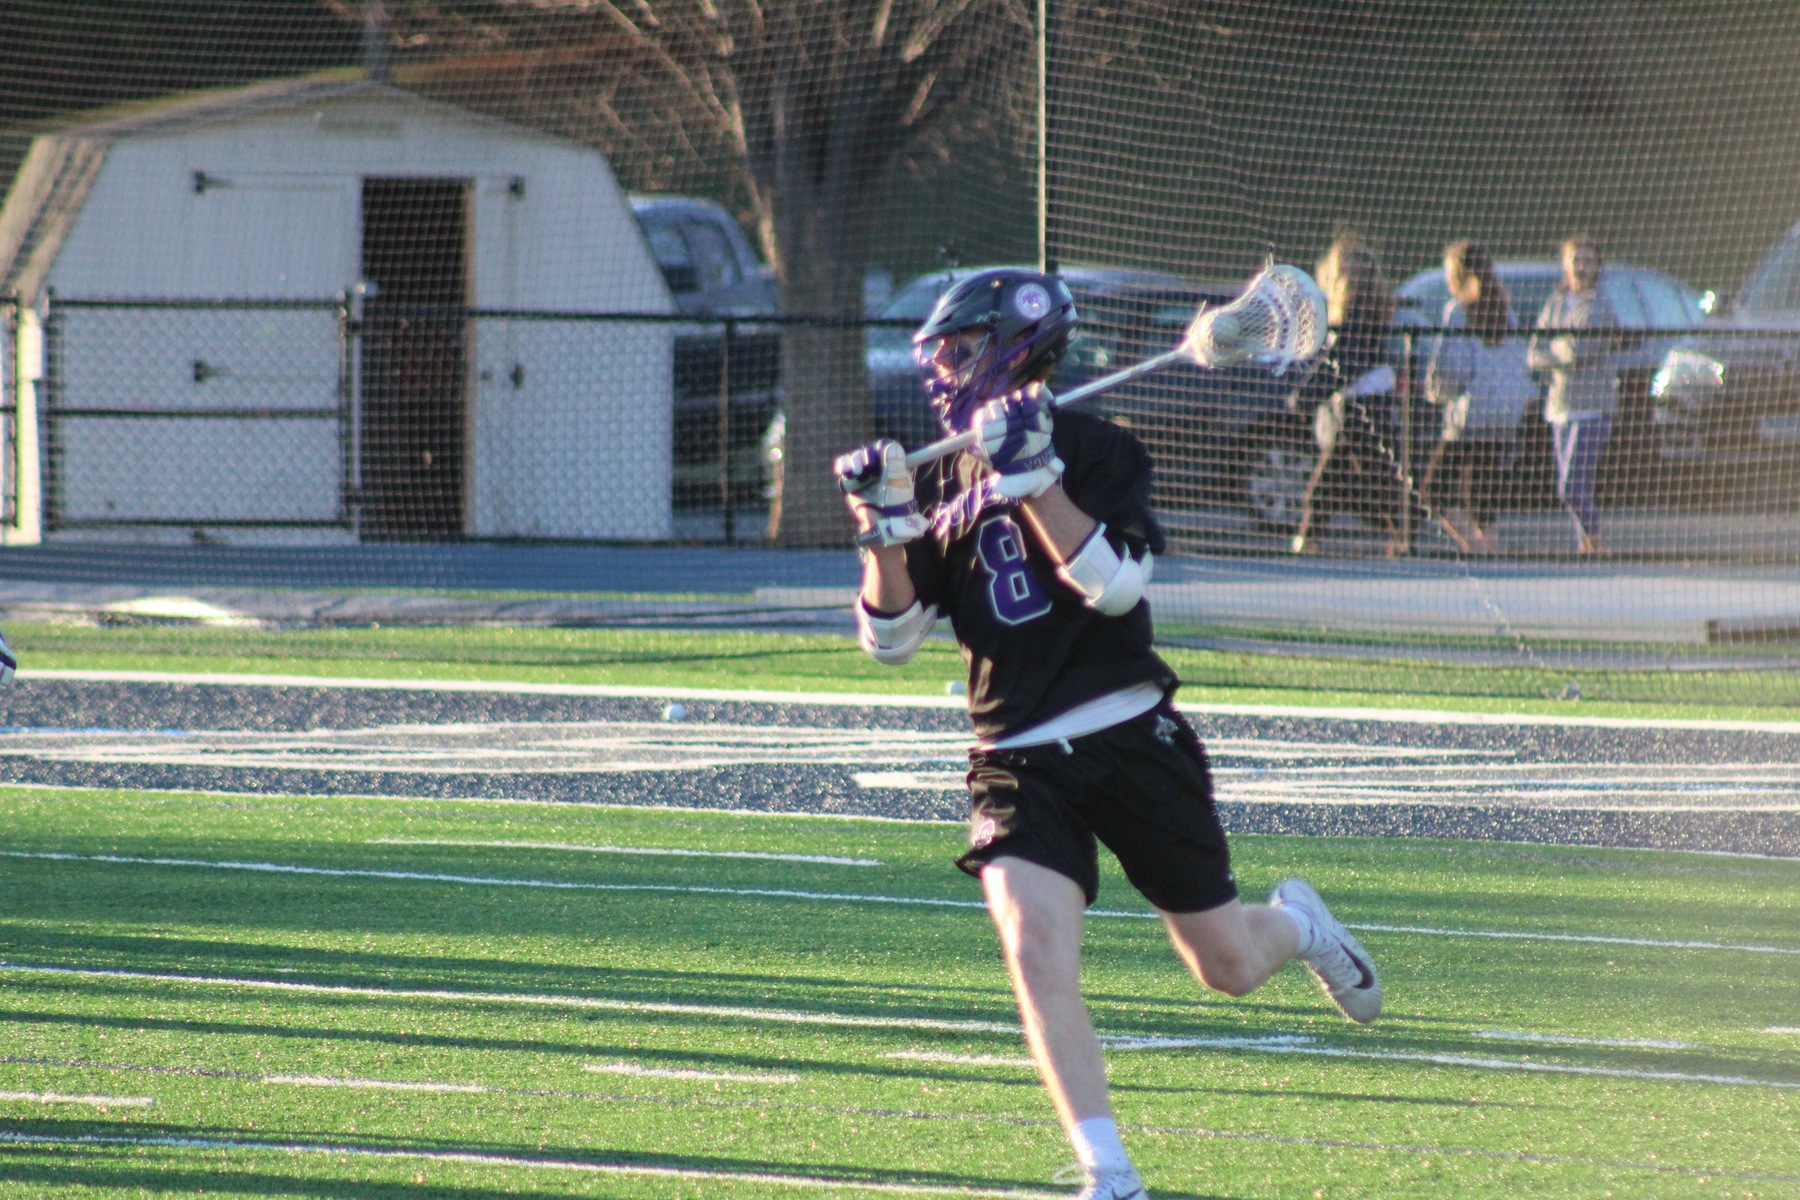 Senior Jack Myers (#8), who is on track to be Gonzaga's All Time Leading Goal Scorer by the end of this month, was very involved in the Eagle offensive attack.